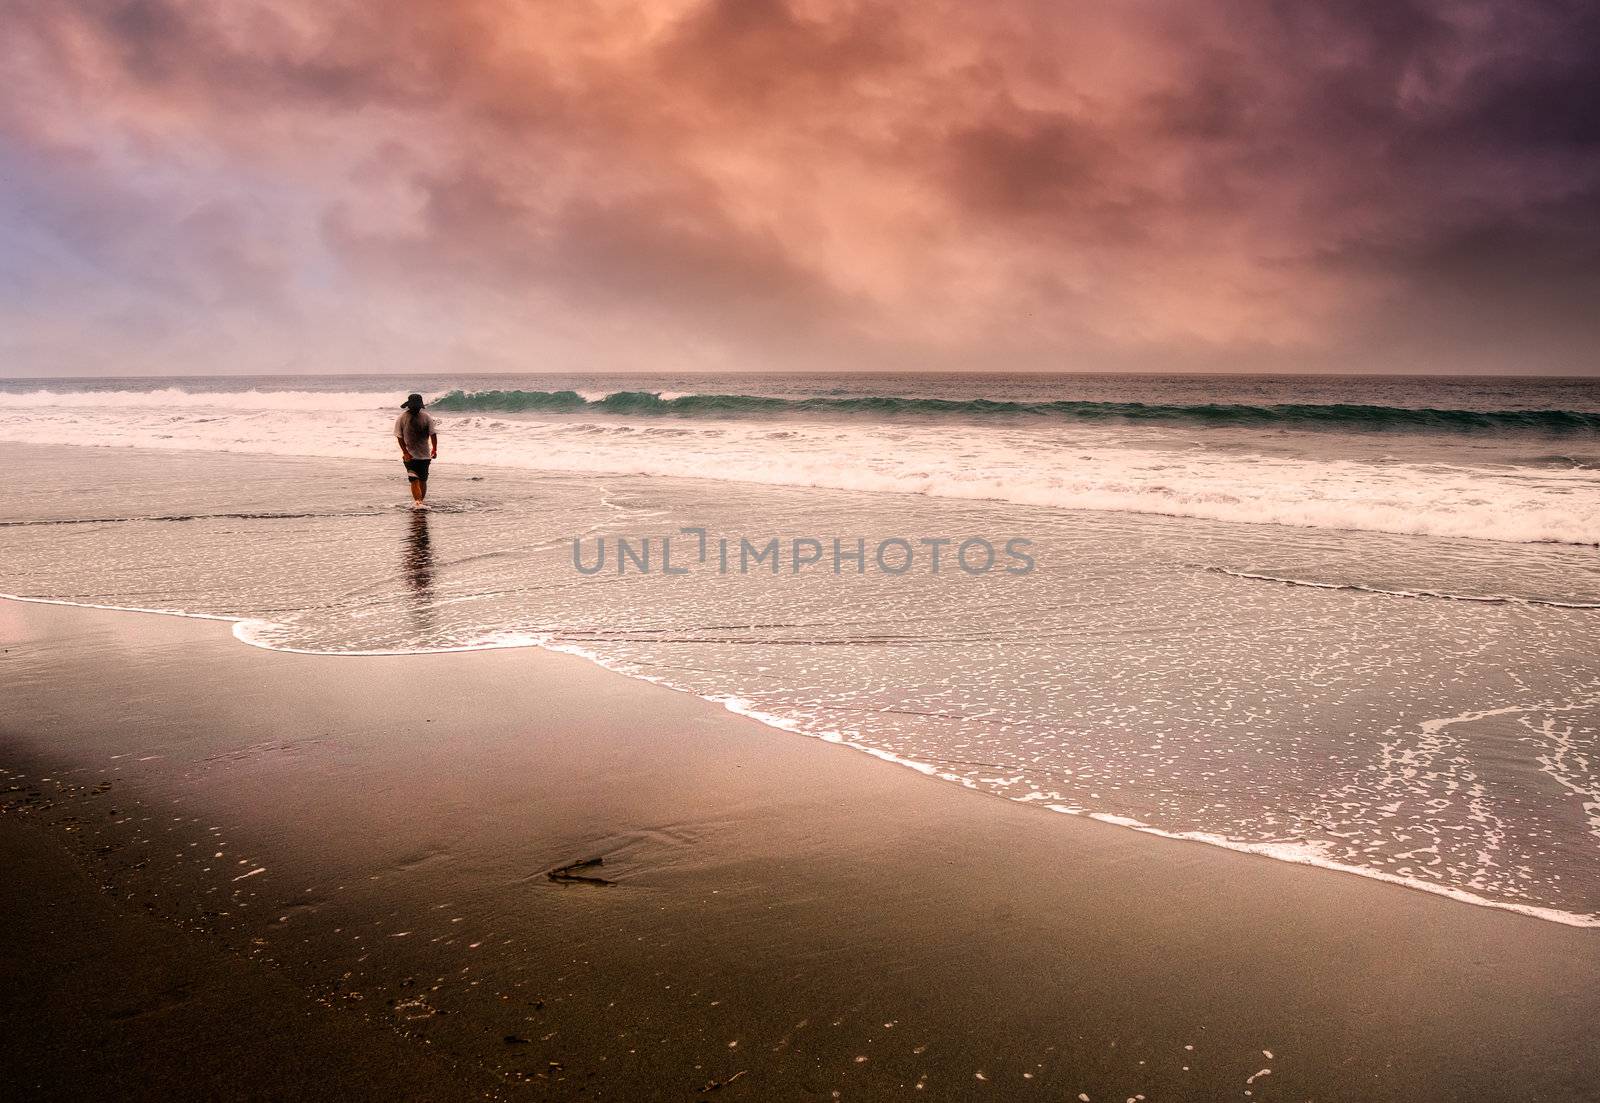 One man walking lonely at the dramatic and beautiful beach.